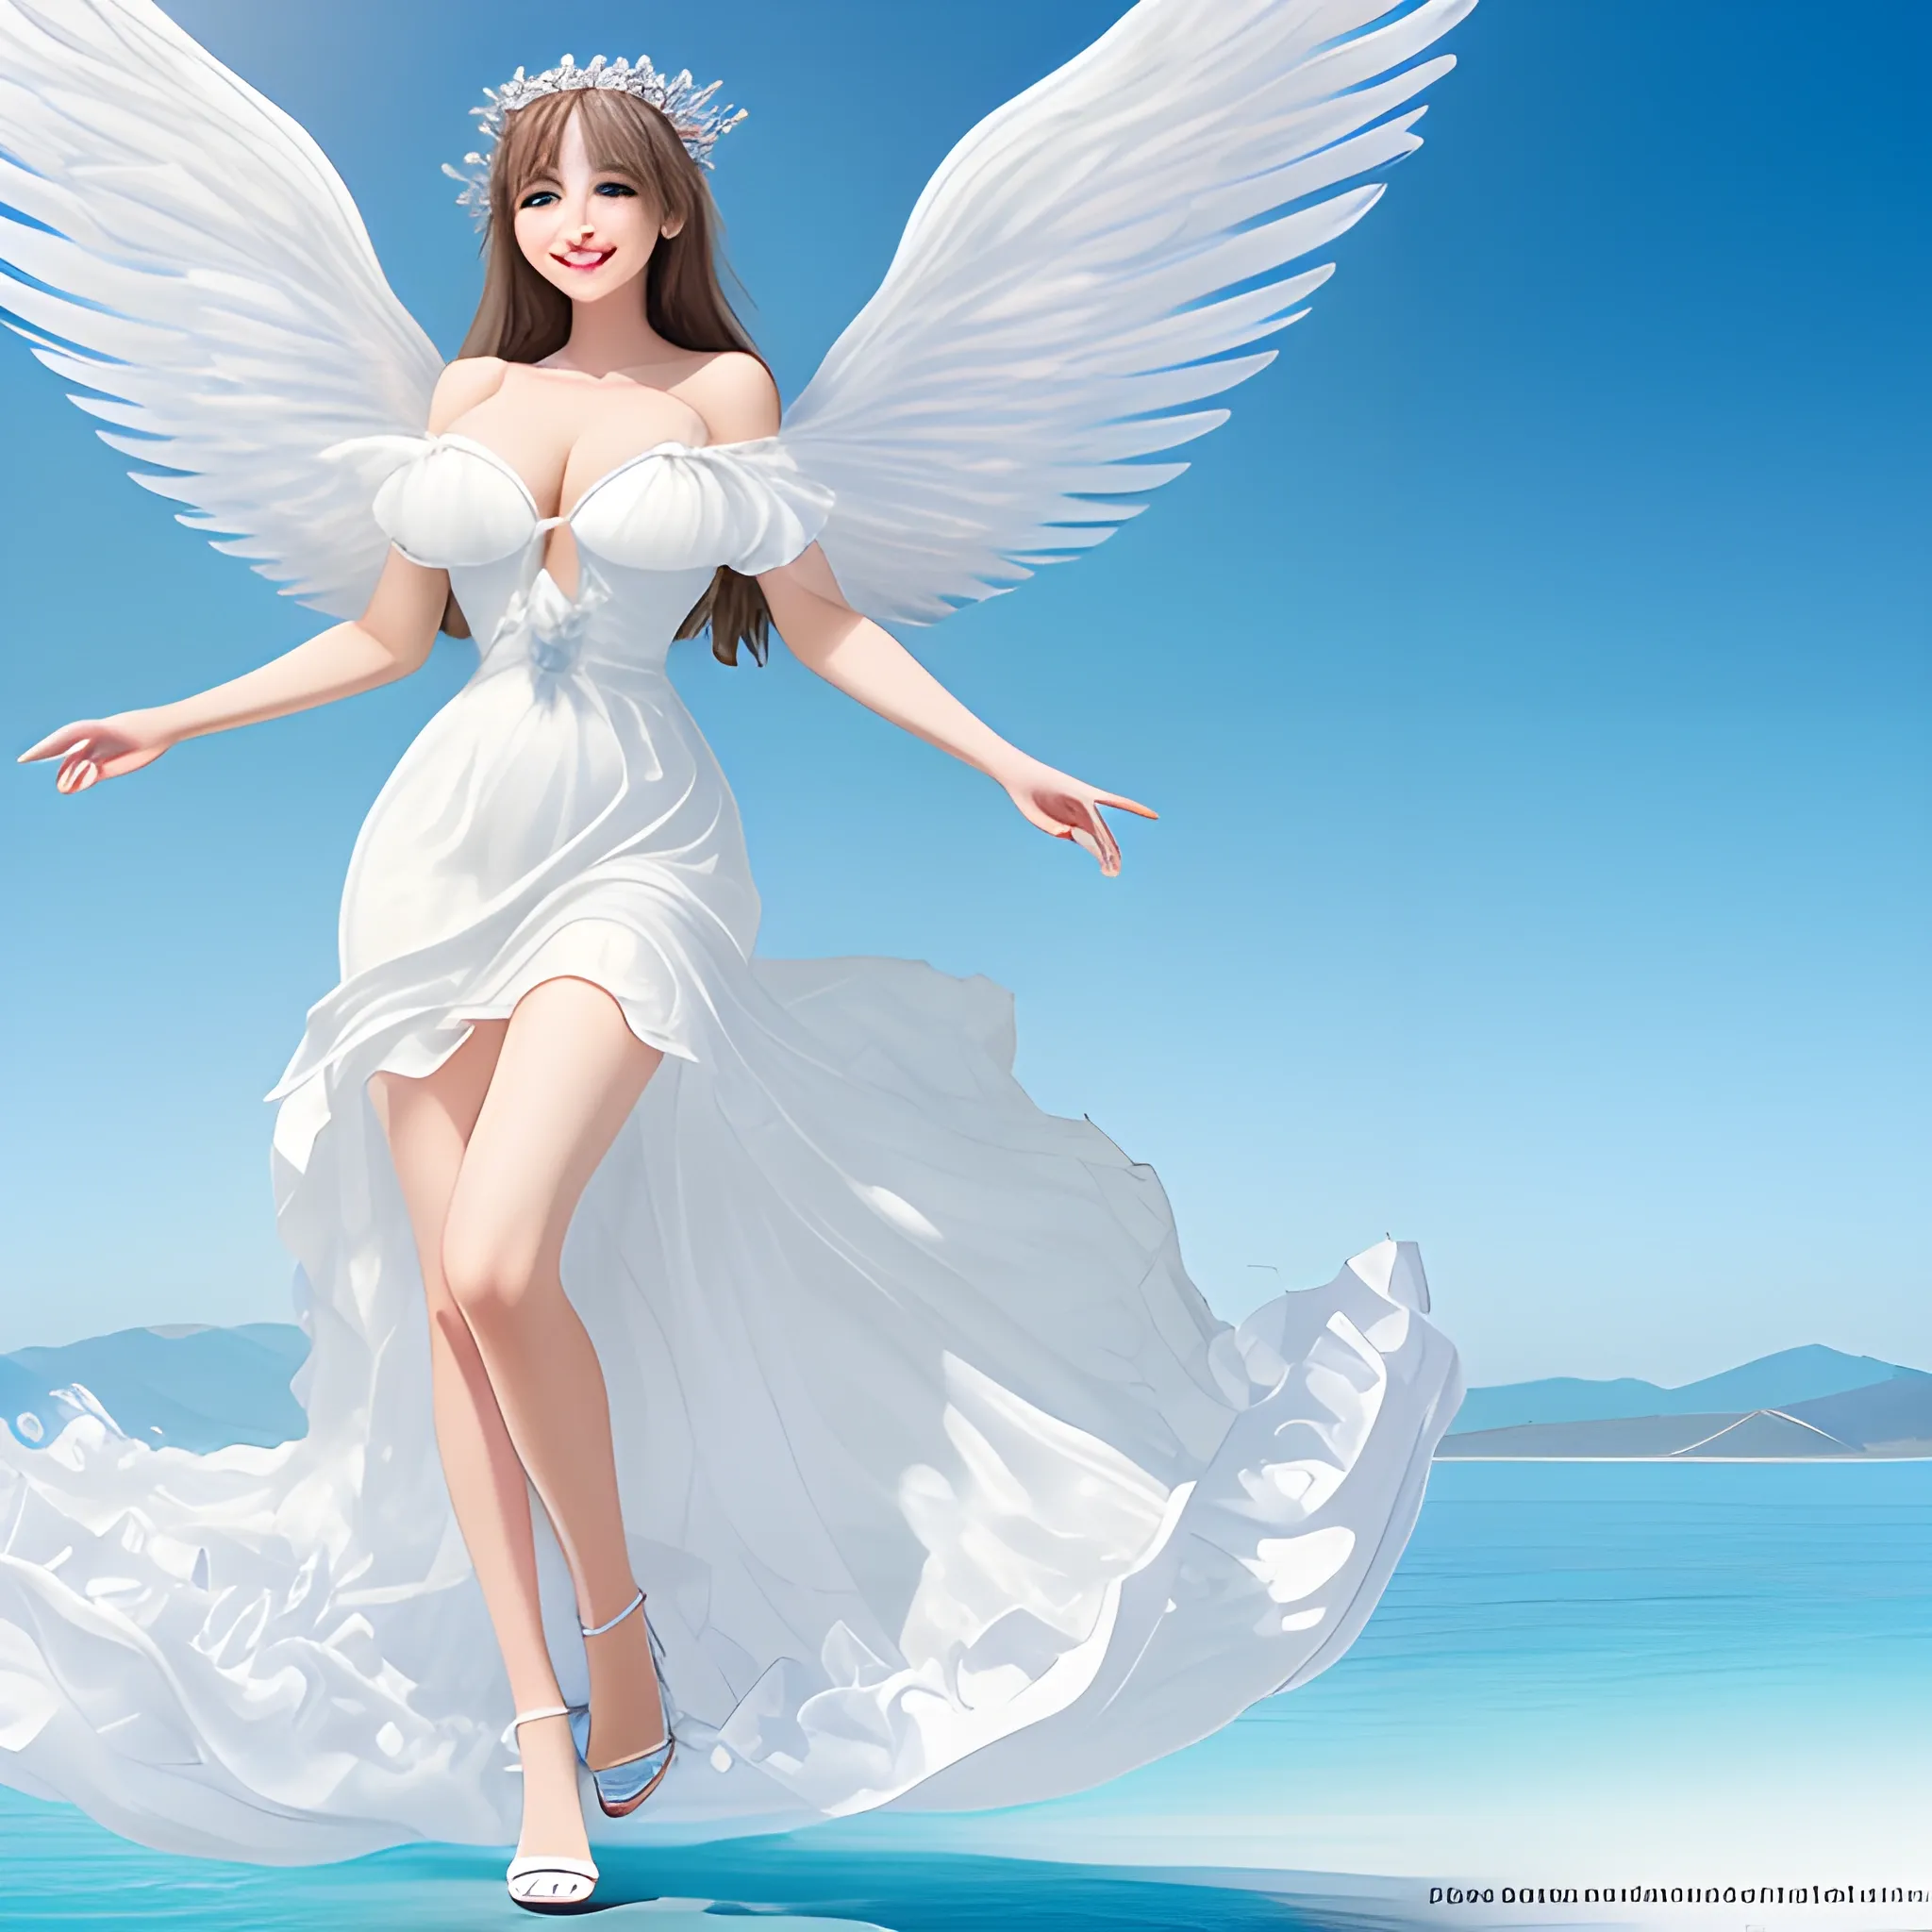 ((masterpiece)), ((best quality)), (exquisite), 8k, beautiful, wing on back, floating, cute angel, smile, full body, large breasts, white gossamer dress, sandals, blue sky, under view